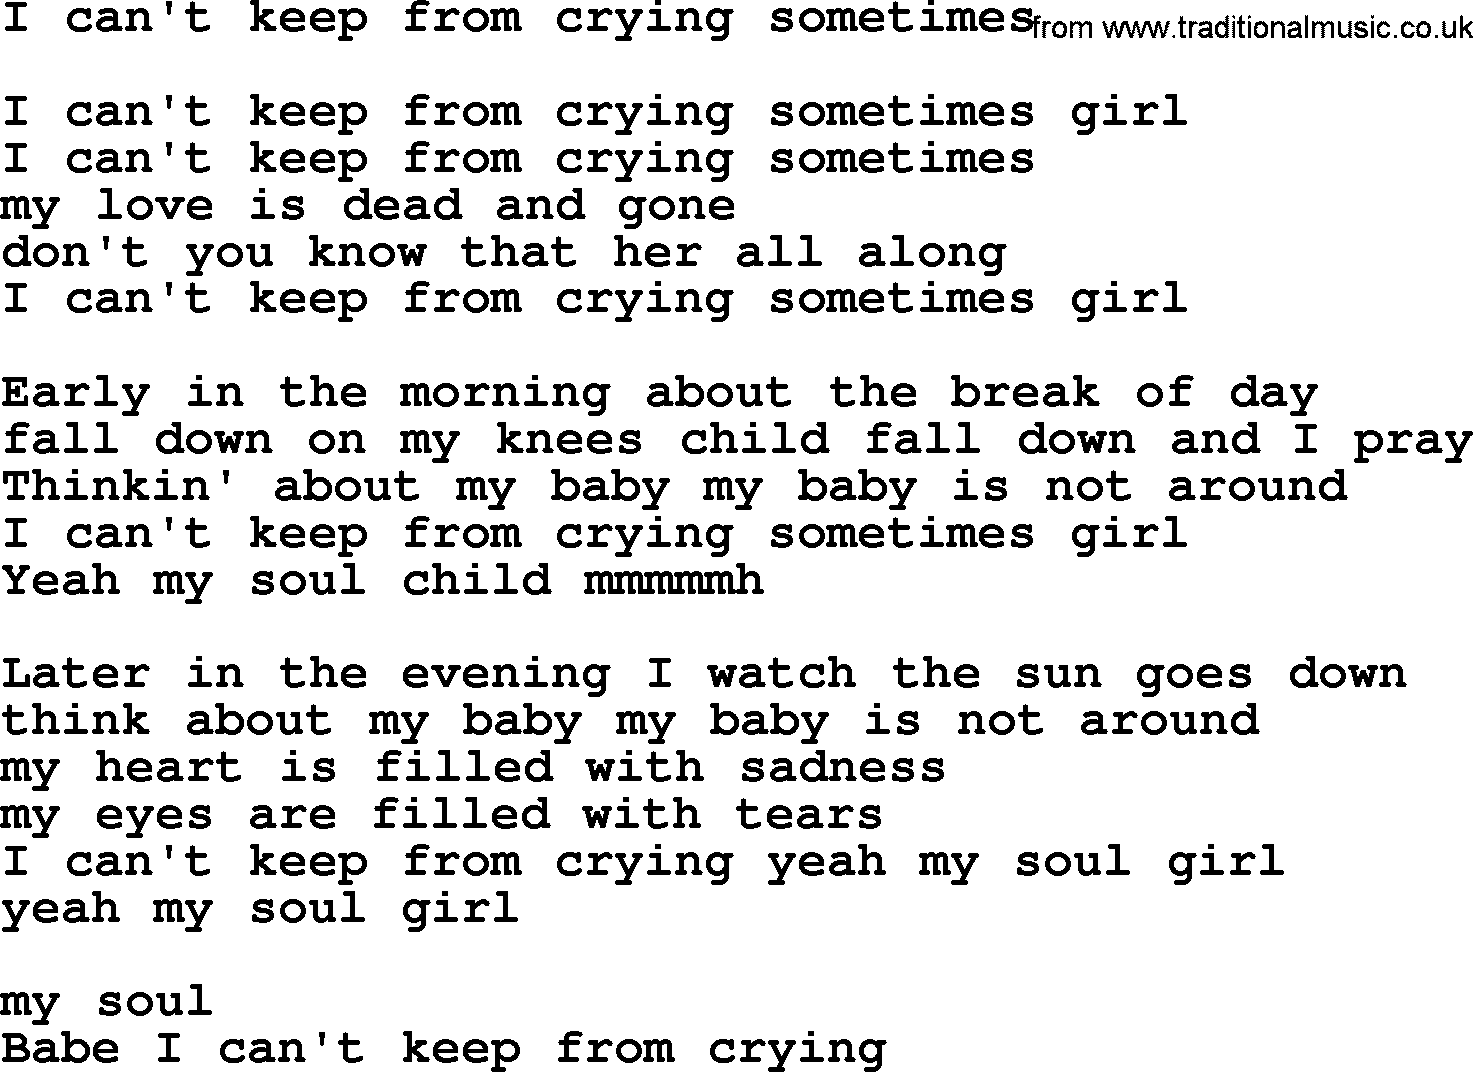 The Byrds song I Can't Keep From Crying Sometimes, lyrics